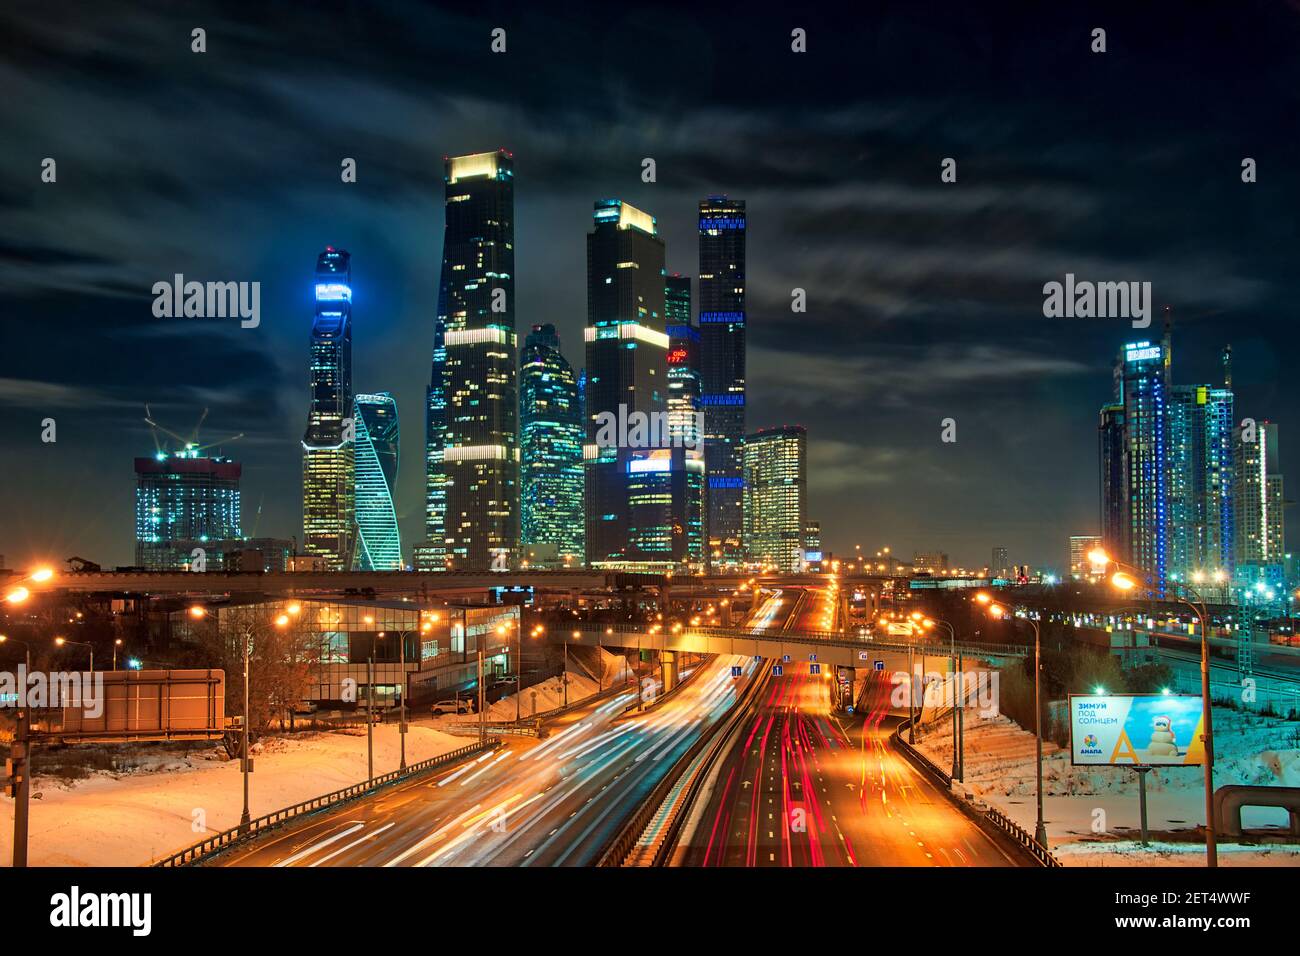 Light Trails and Moskva-City Skyscrapers in Winter Dusk Stock Photo